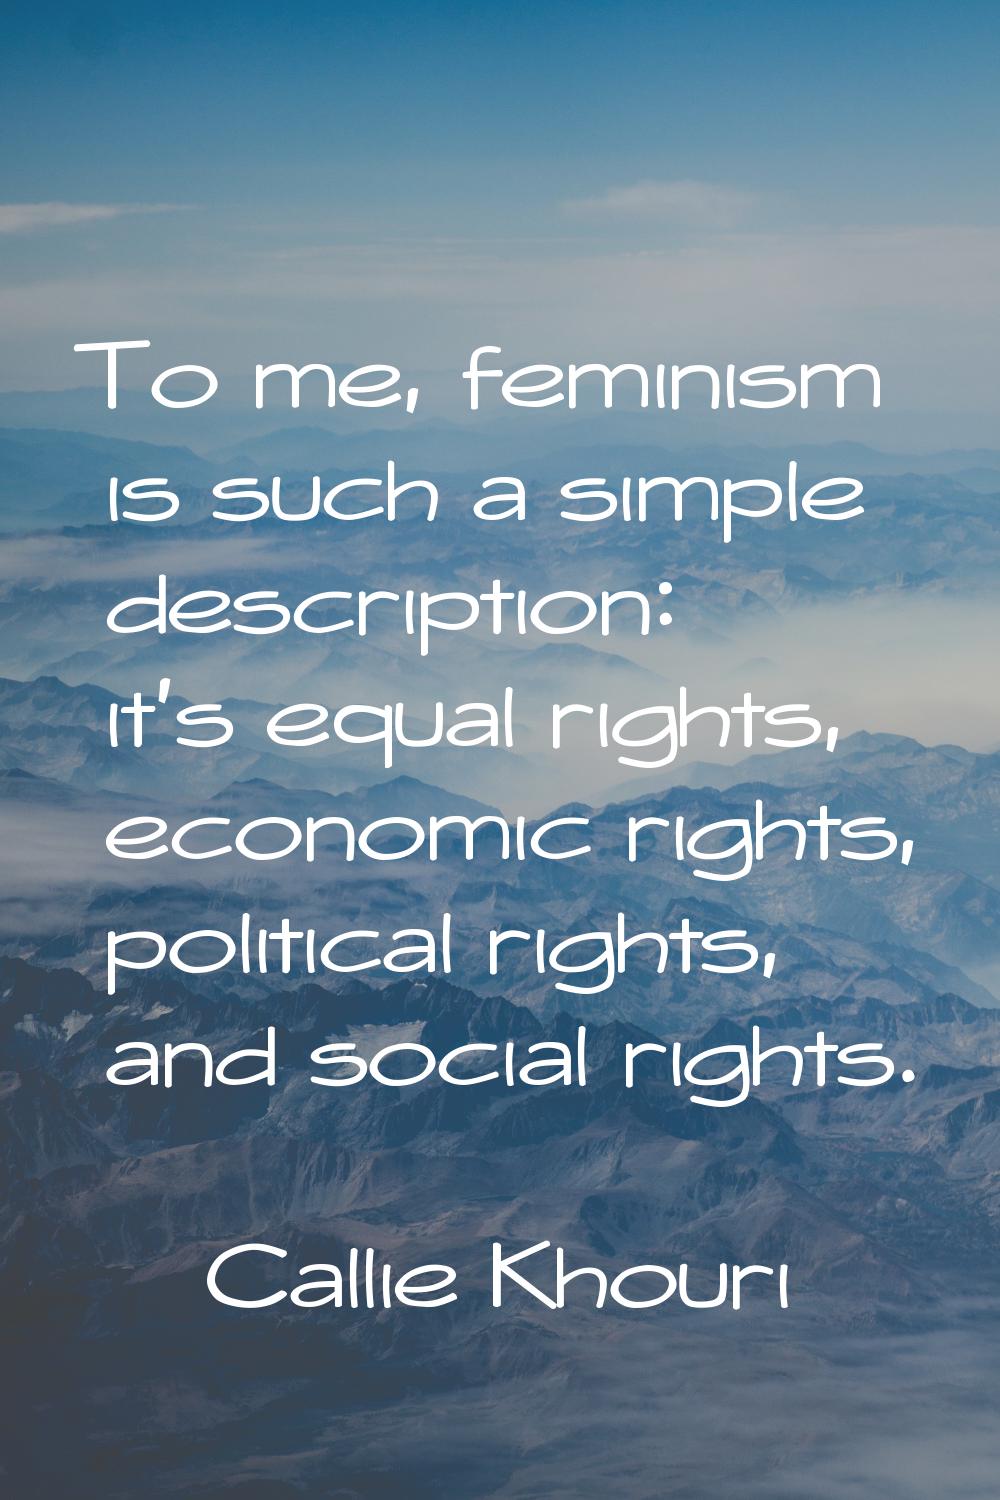 To me, feminism is such a simple description: it's equal rights, economic rights, political rights,